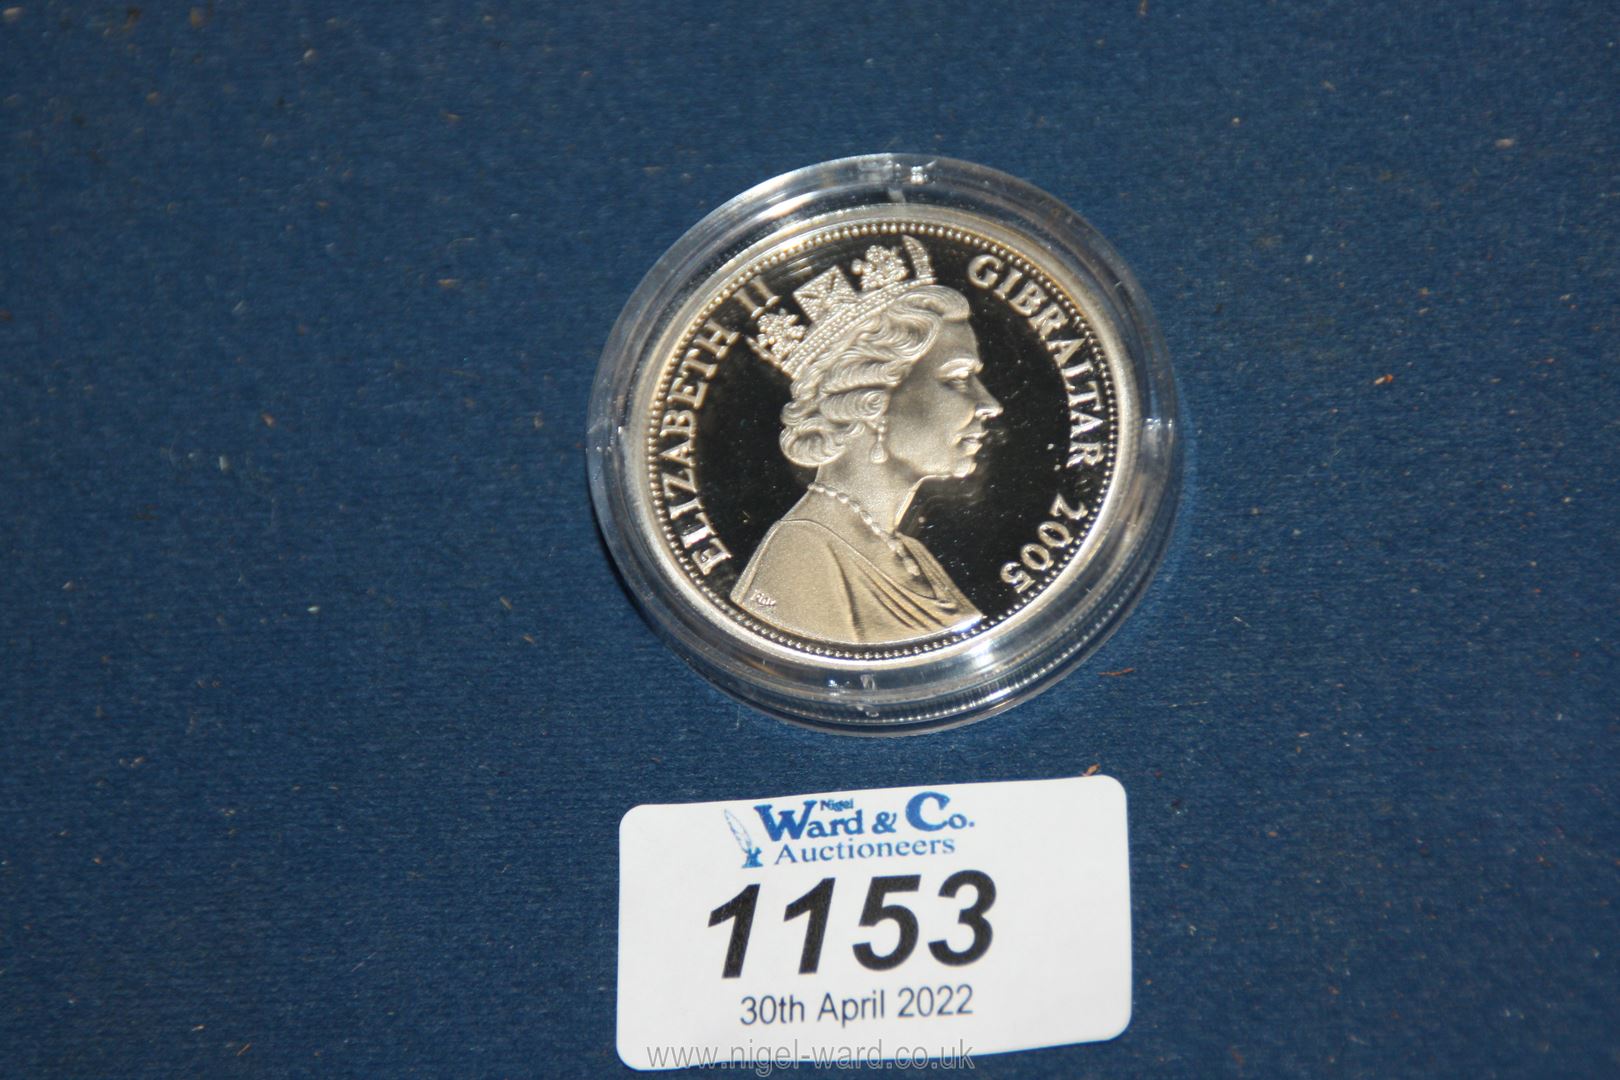 A Battle of Trafalgar Lord Horatio Nelson, 2005 Silver Proof Gibraltar £5 Coin, - Image 2 of 2